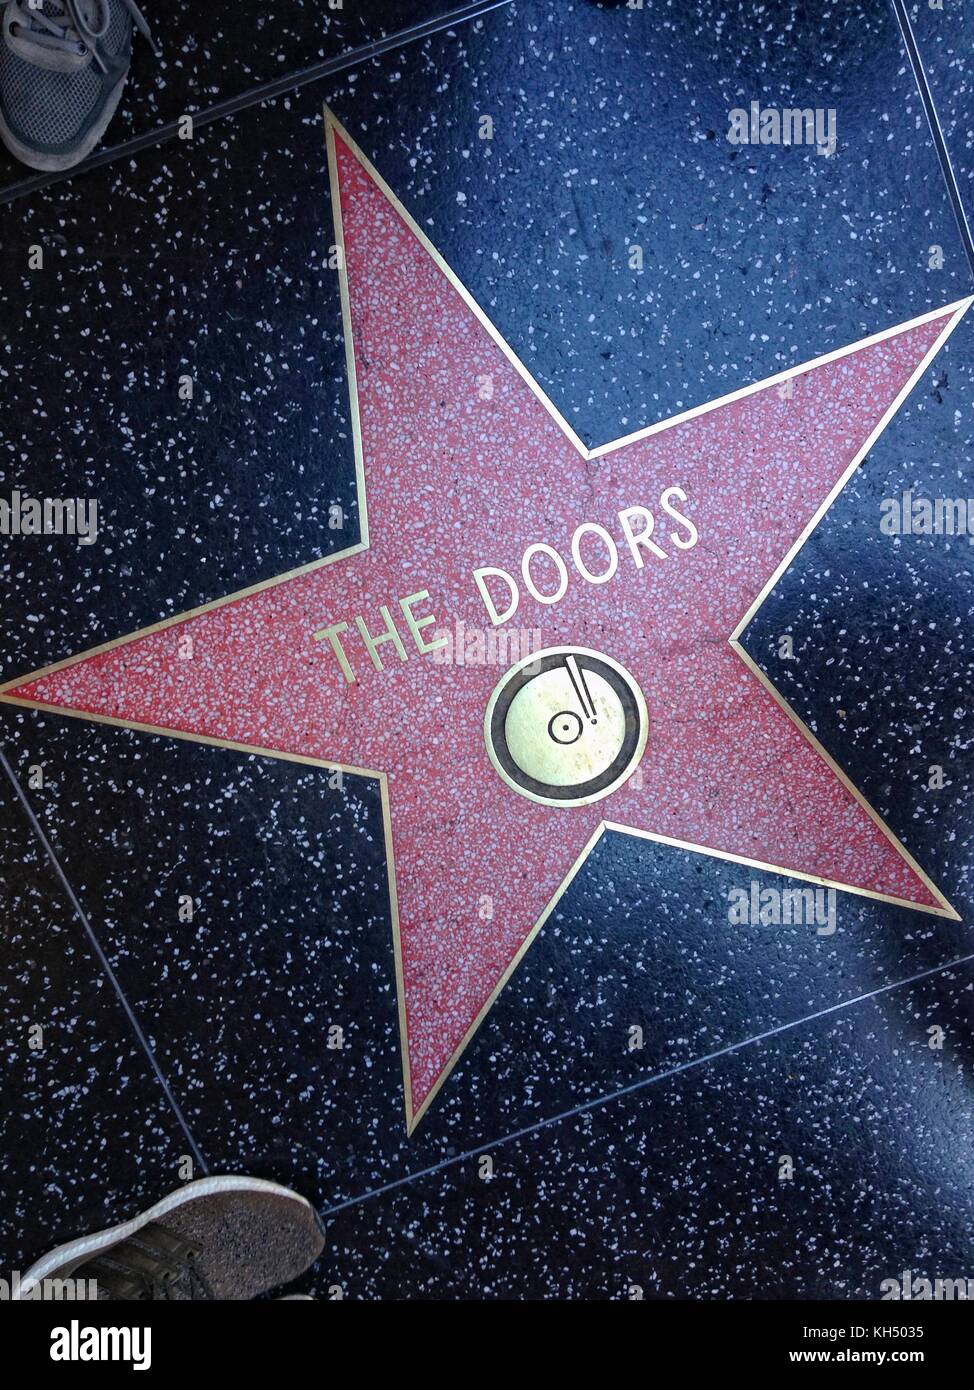 Hollywood, California - July 26 2017: The Doors Hollywood walk of fame star on July 26, 2017 in Hollywood, CA. American rock band formed in 1965 in Lo Stock Photo